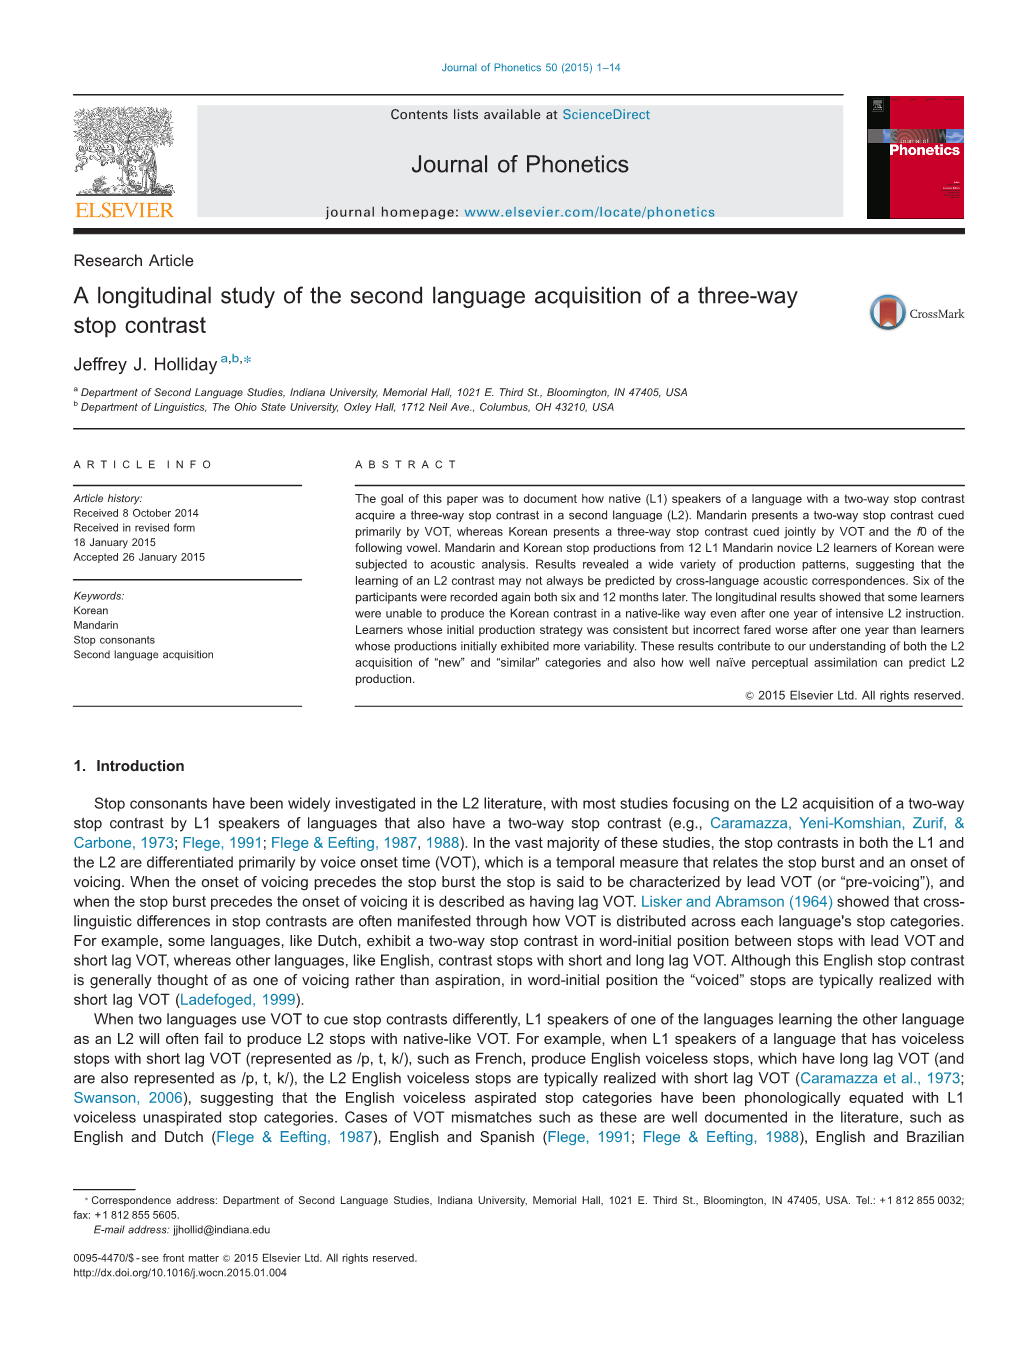 A Longitudinal Study of the Second Language Acquisition of a Three-Way Stop Contrast ⁎ Jeffrey J